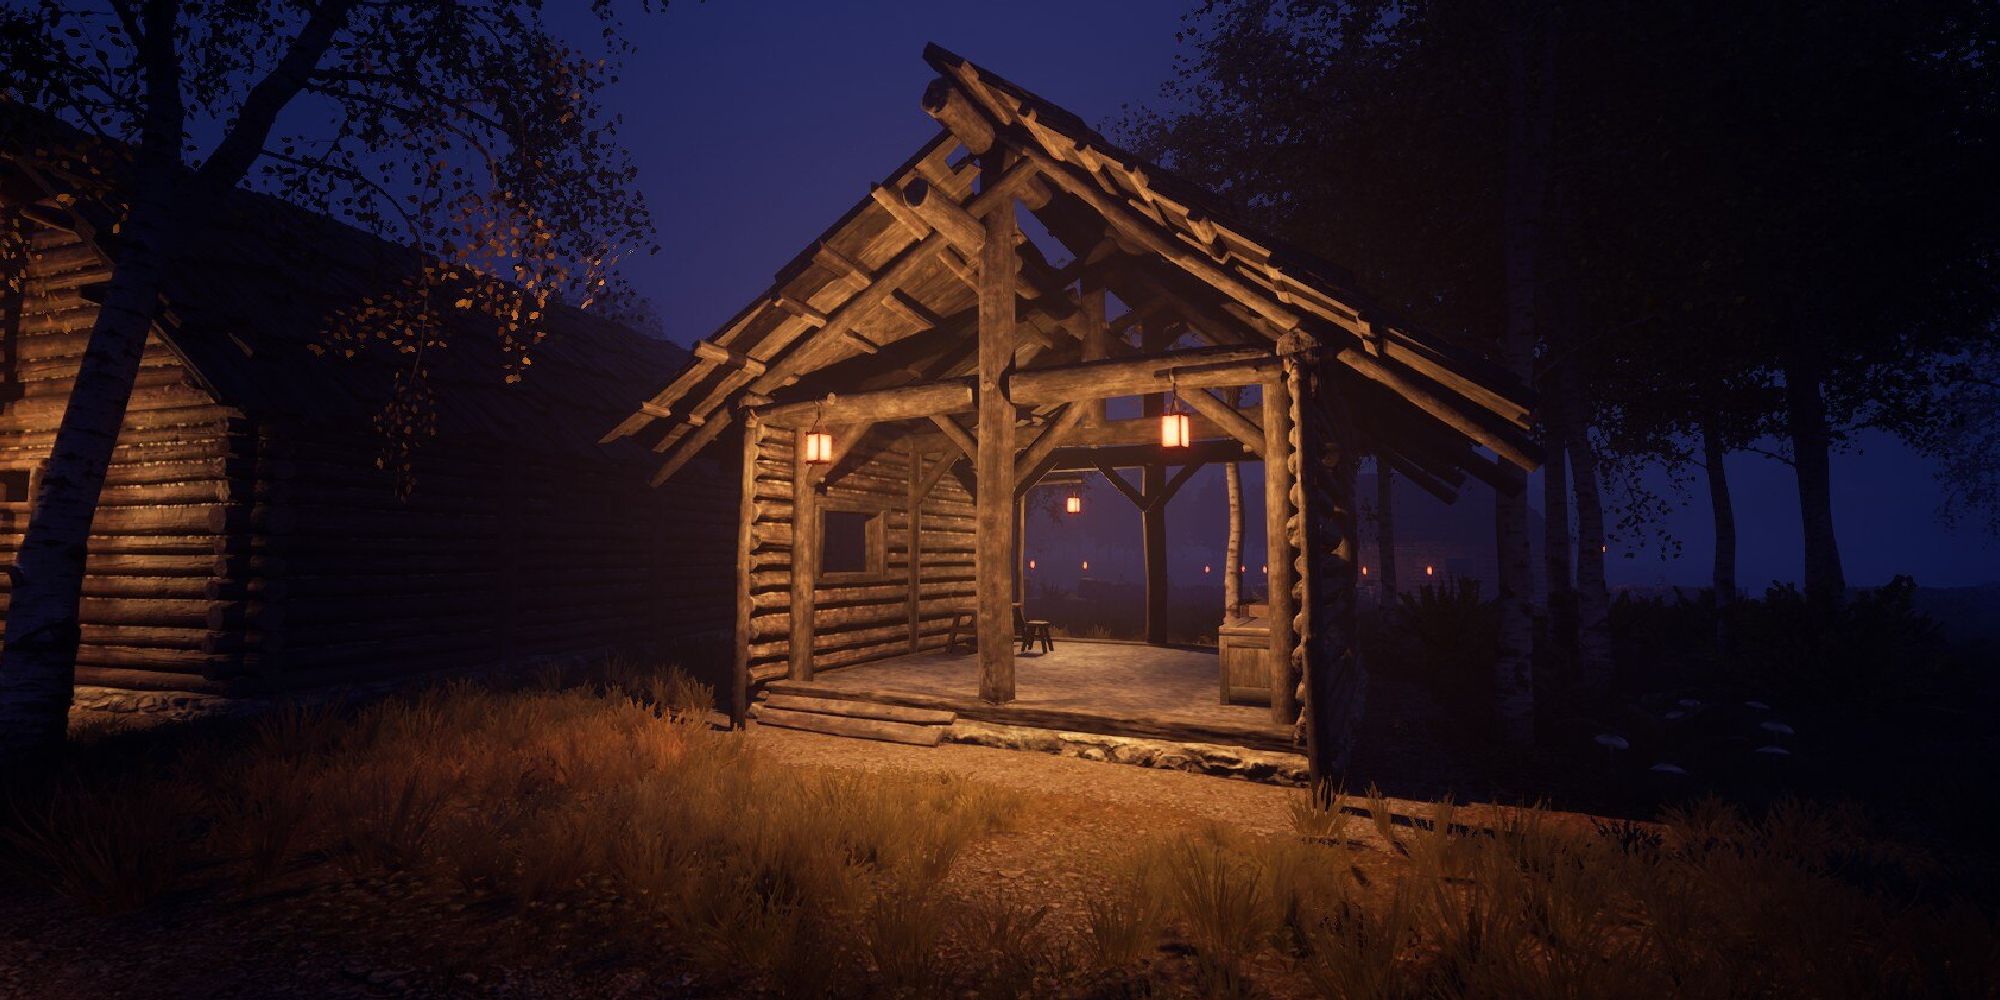 workshop with lighting at night